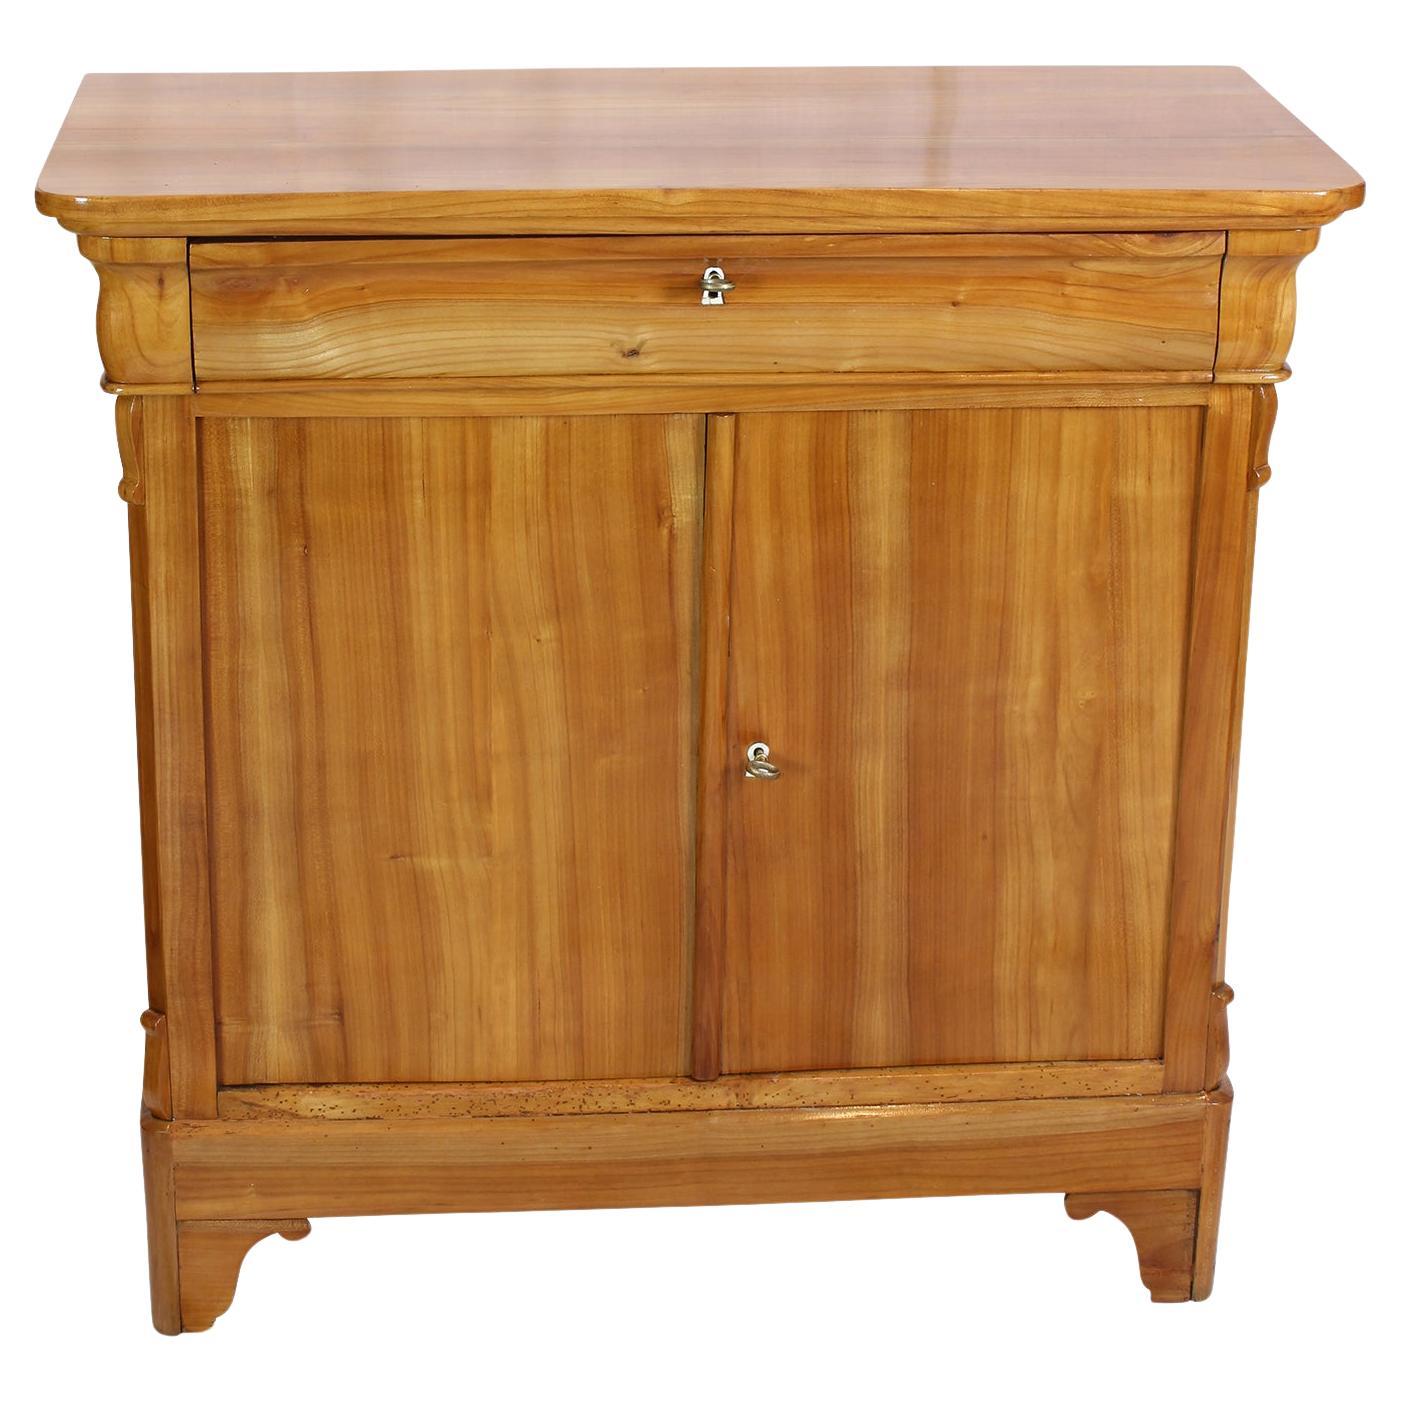 Early 19th Century Biedermeier Cherrywood Half Cabinet / Commode For Sale